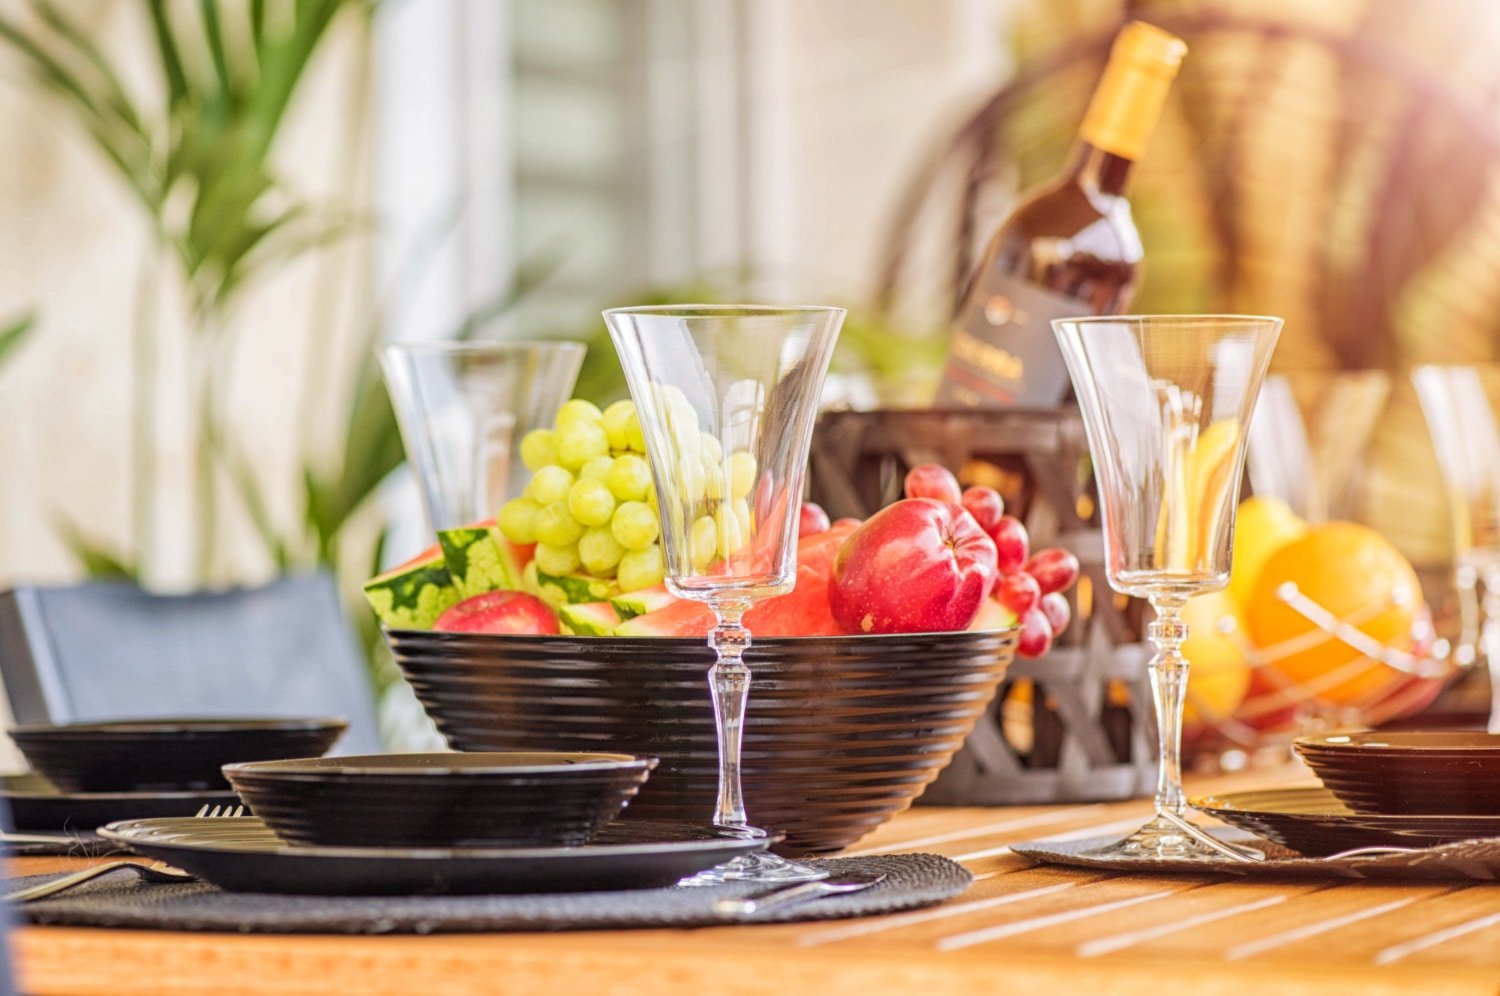 Serve Meals In Style With Duralex USA’s Durable Glassware